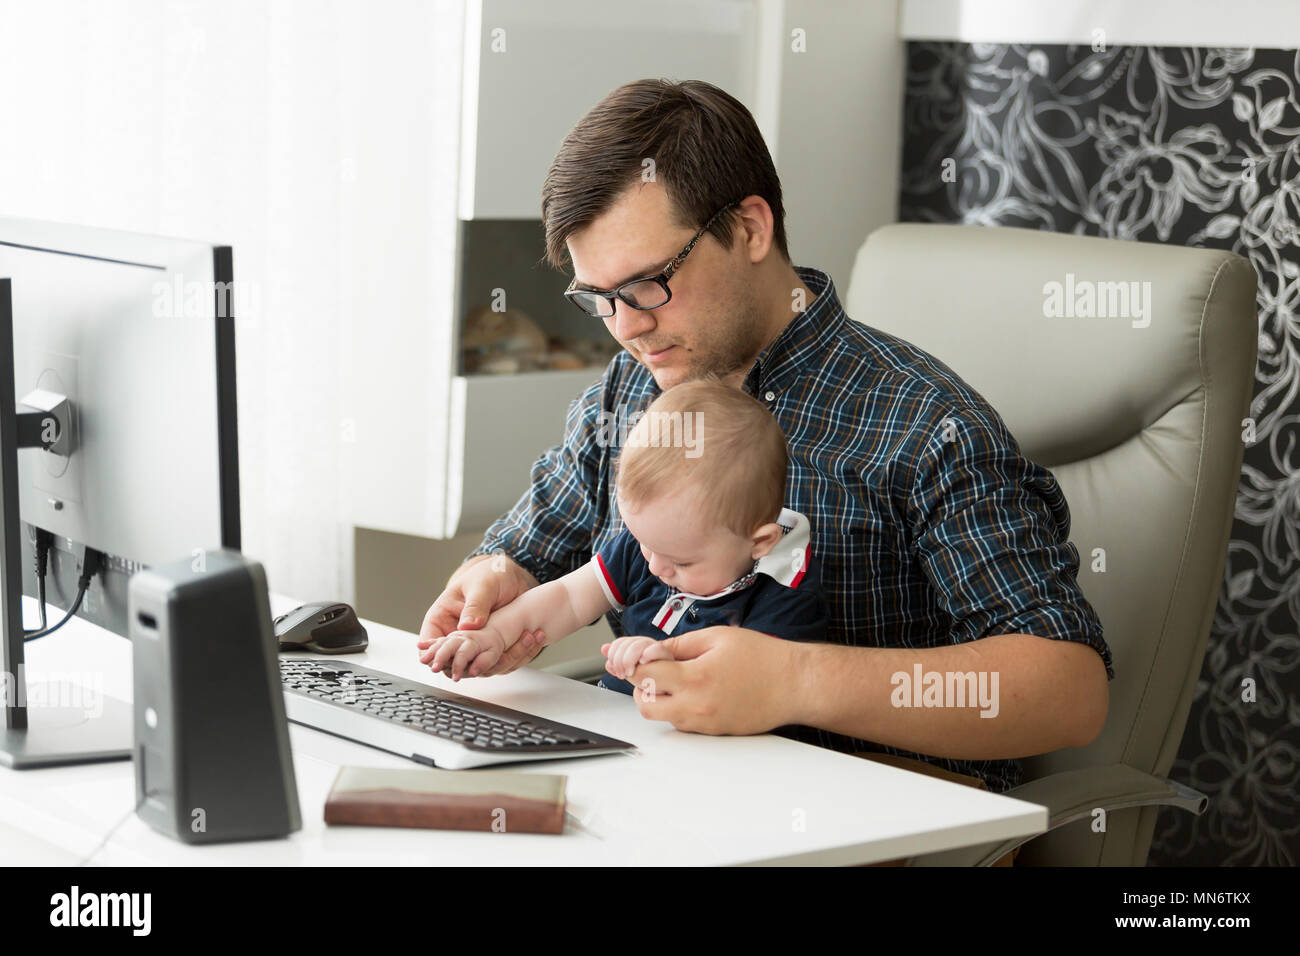 Portrait of young self-employed man working at home office on computer and looking after his baby son Stock Photo